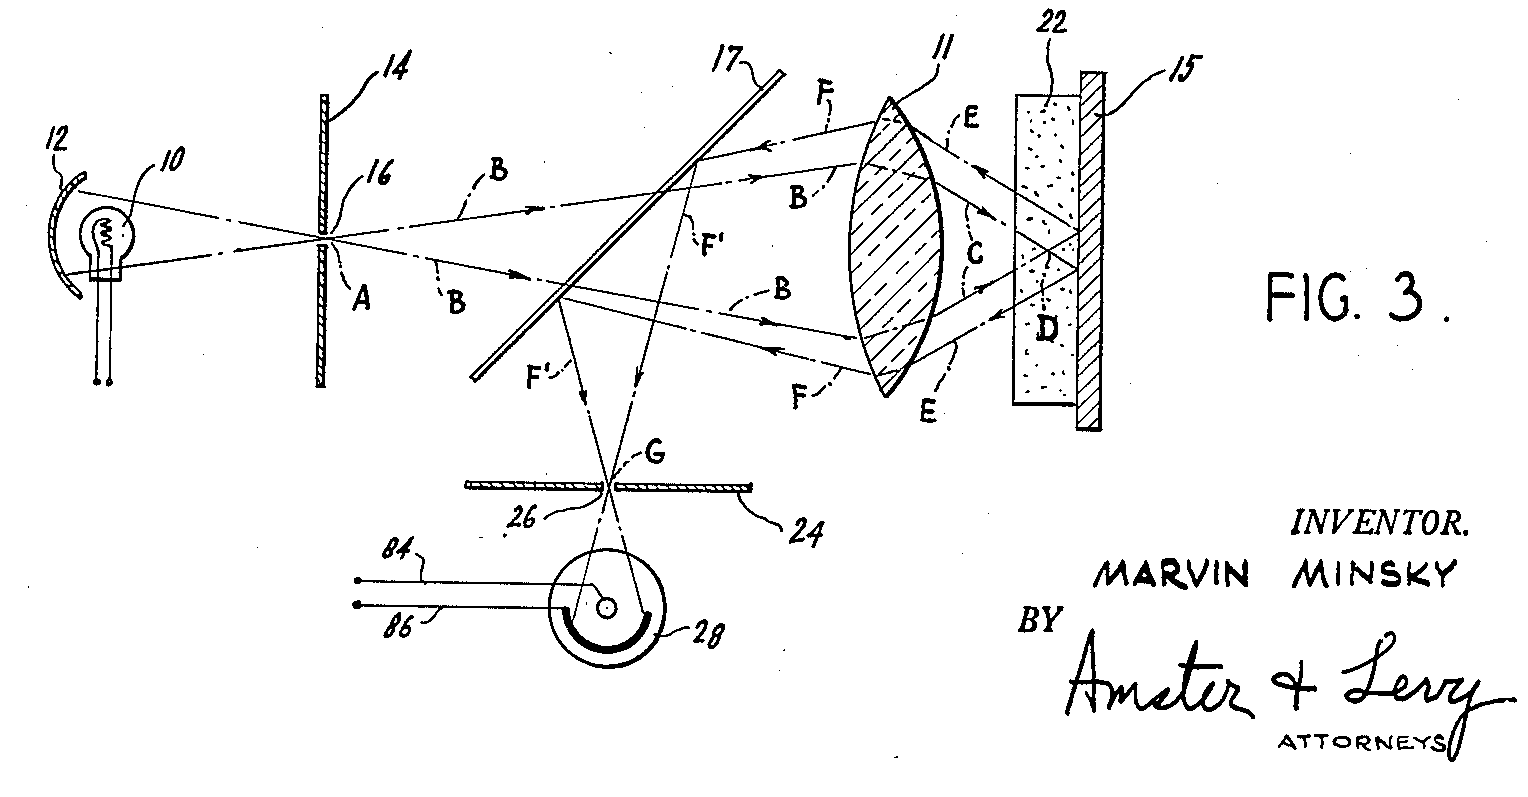 An image from Minsky's original patent introducing a confocal scanning microscope. In a curious twist of history, Minsky is better known for his pioneering work in AI. 